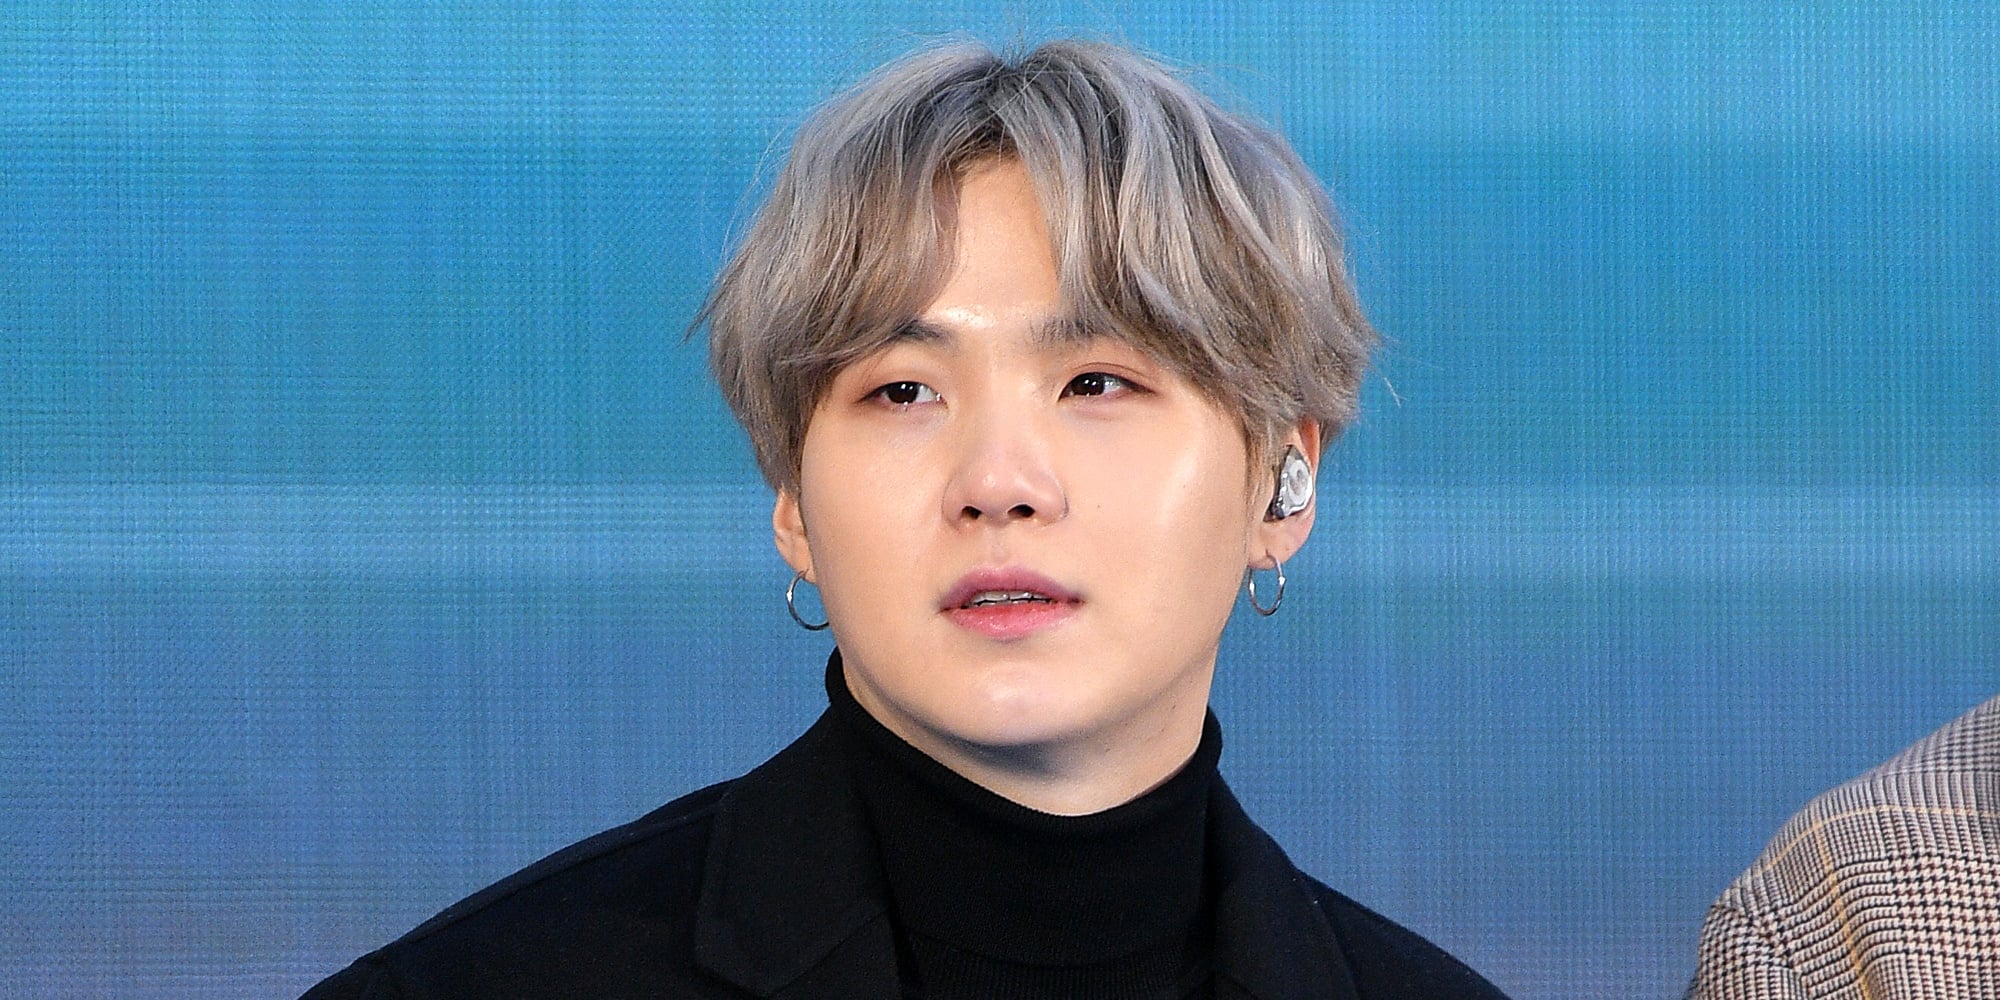 BTS' Suga announces first solo tour, starting with N.Y. shows